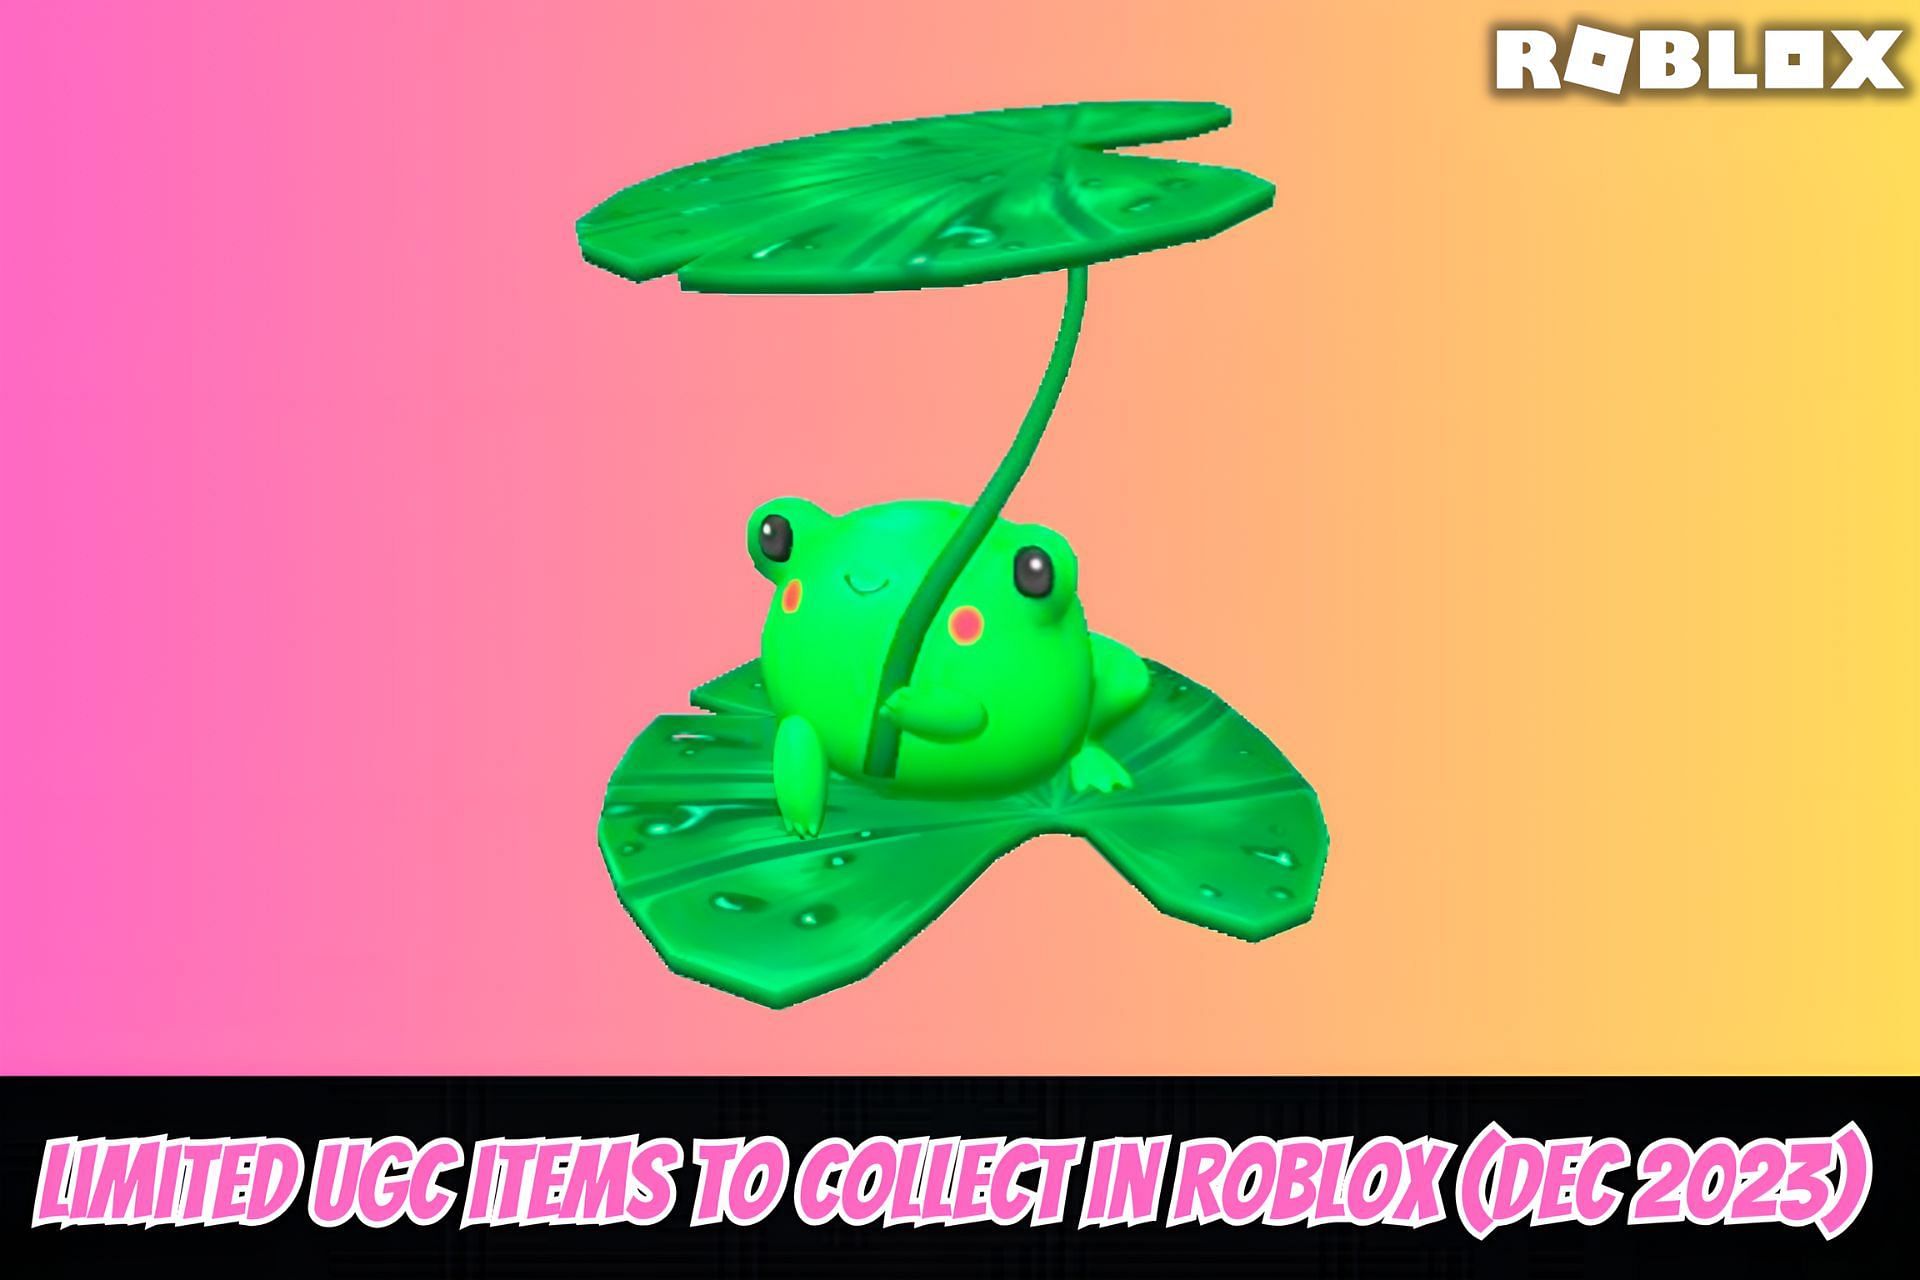 How to buy Roblox UGC limited items from the shop?